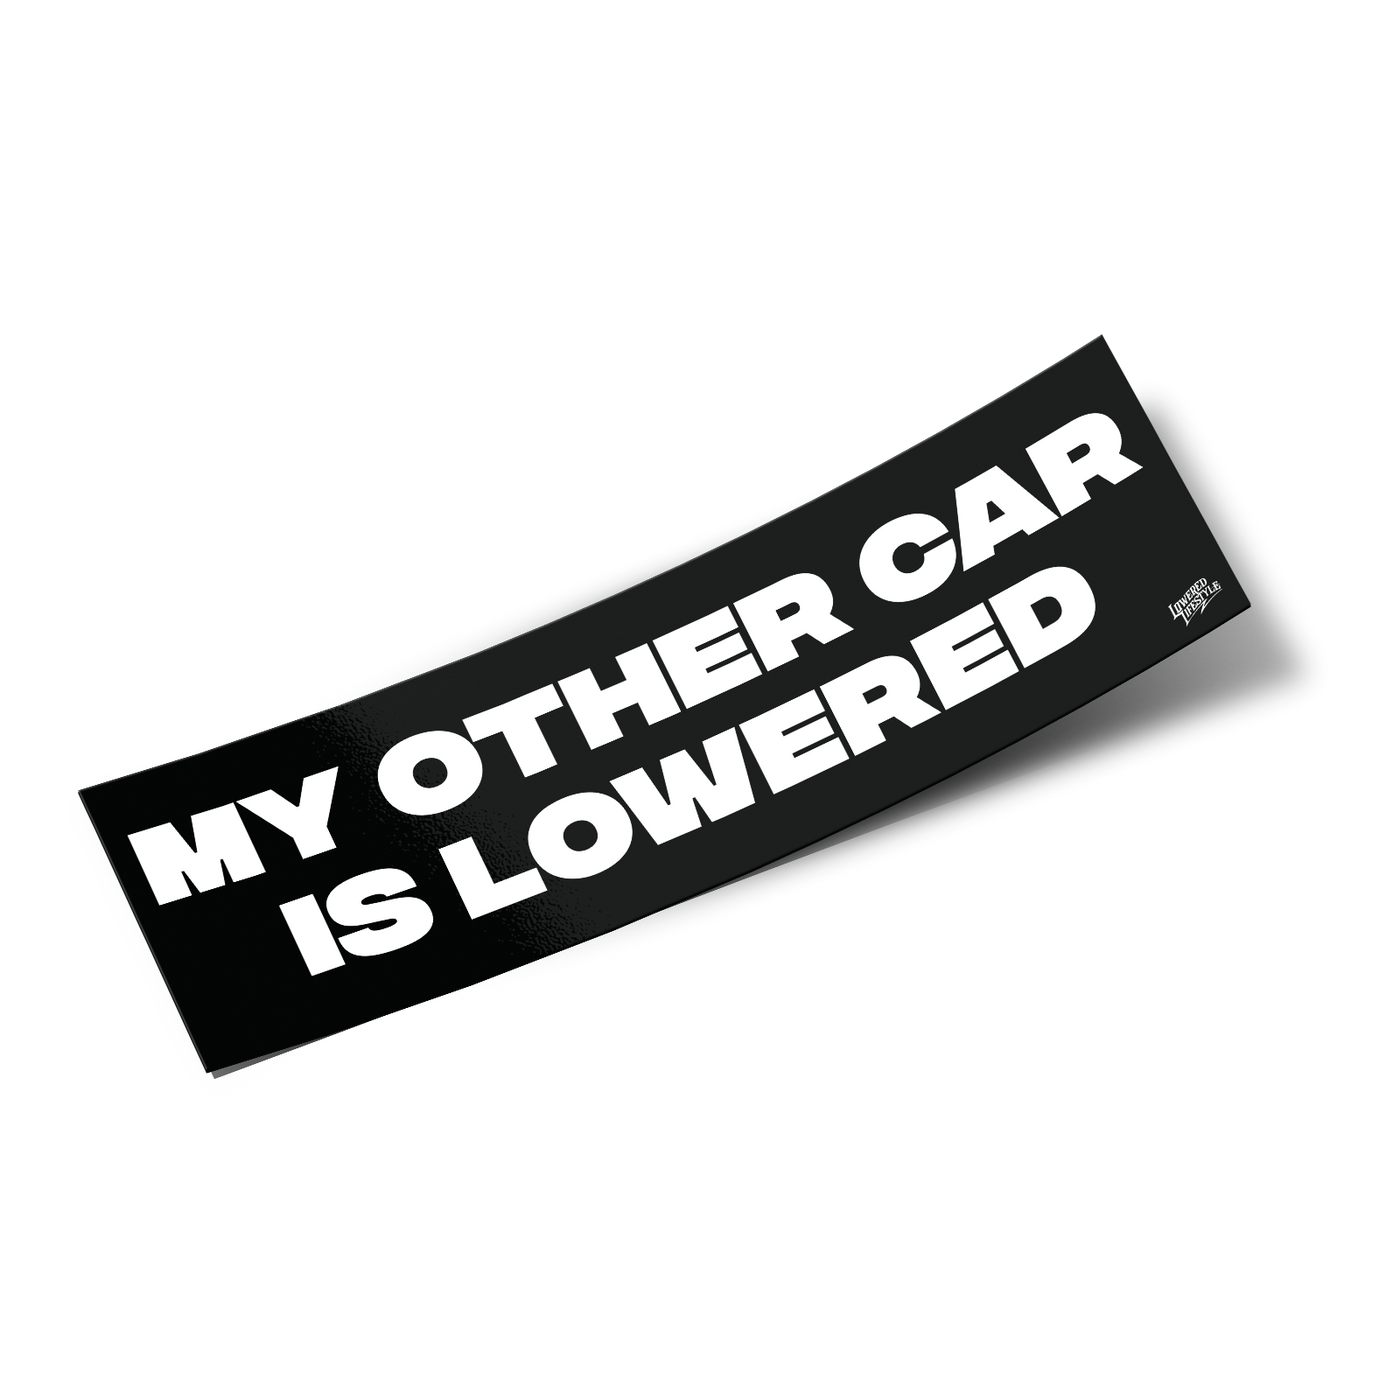 Box Sticker – My other car is lowered